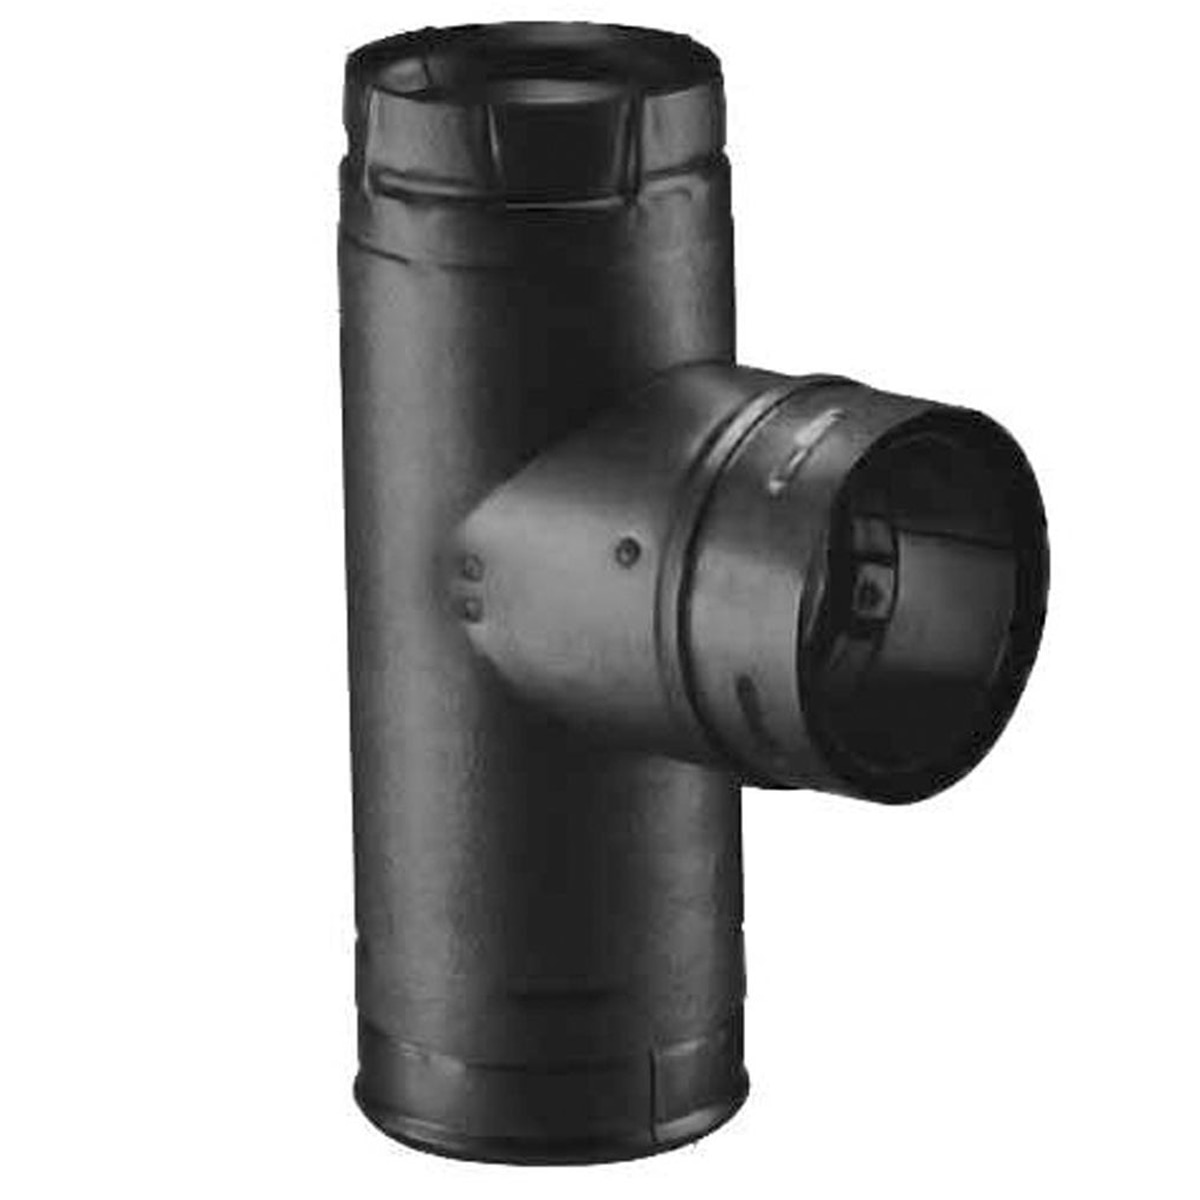 3" PelletVent Pro Black Single Tee With Clean-Out Cap - 3PVP-TB1